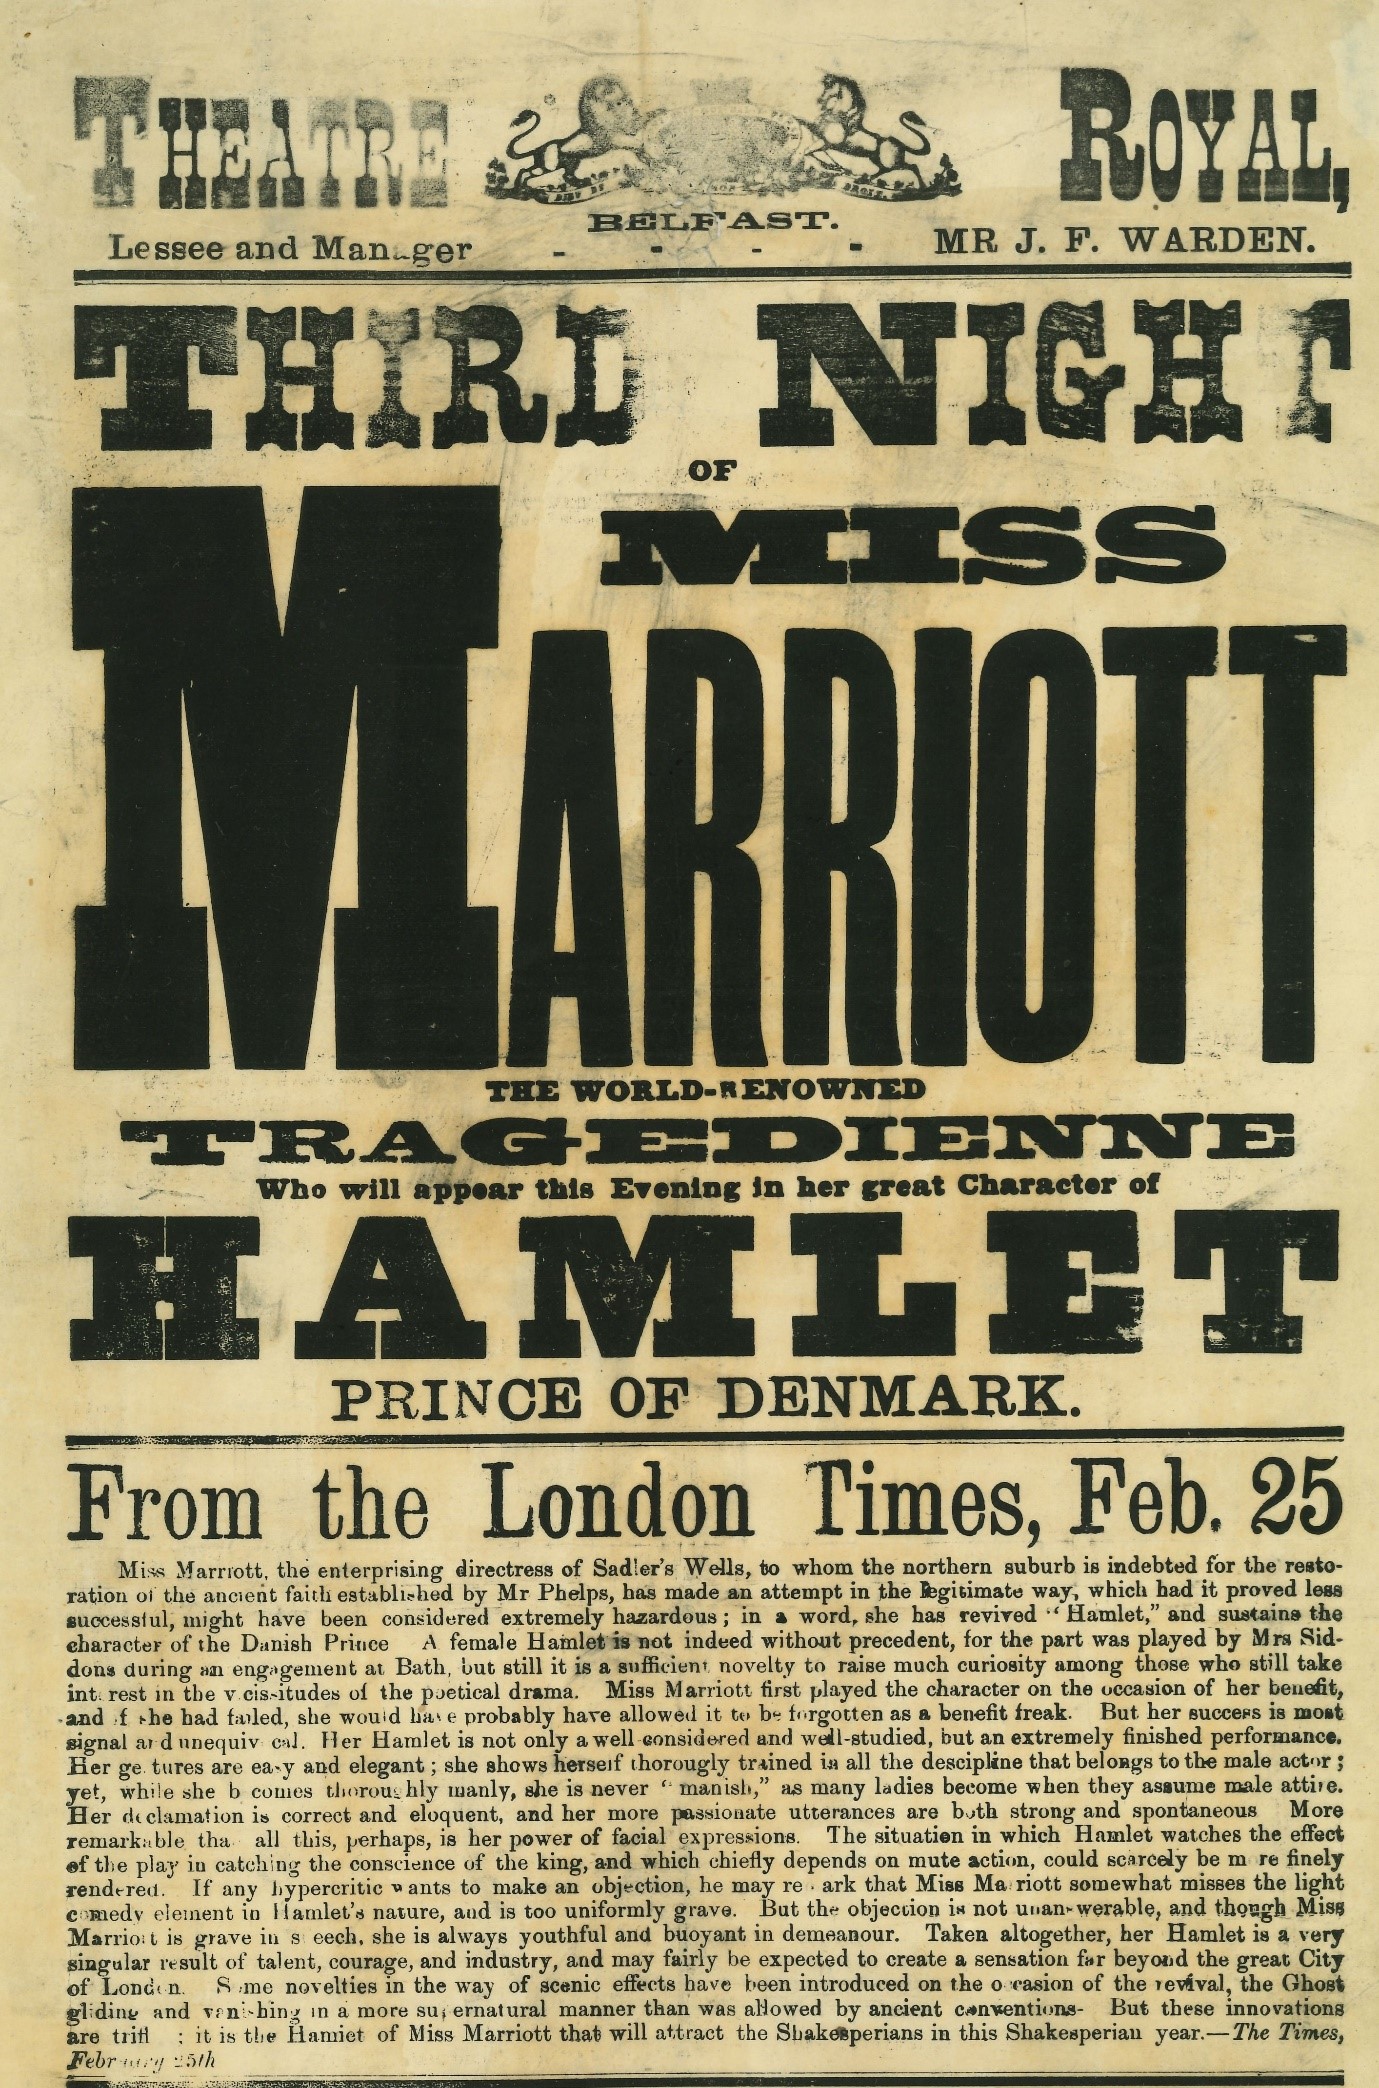 Theatre Royal from the London Times February 25